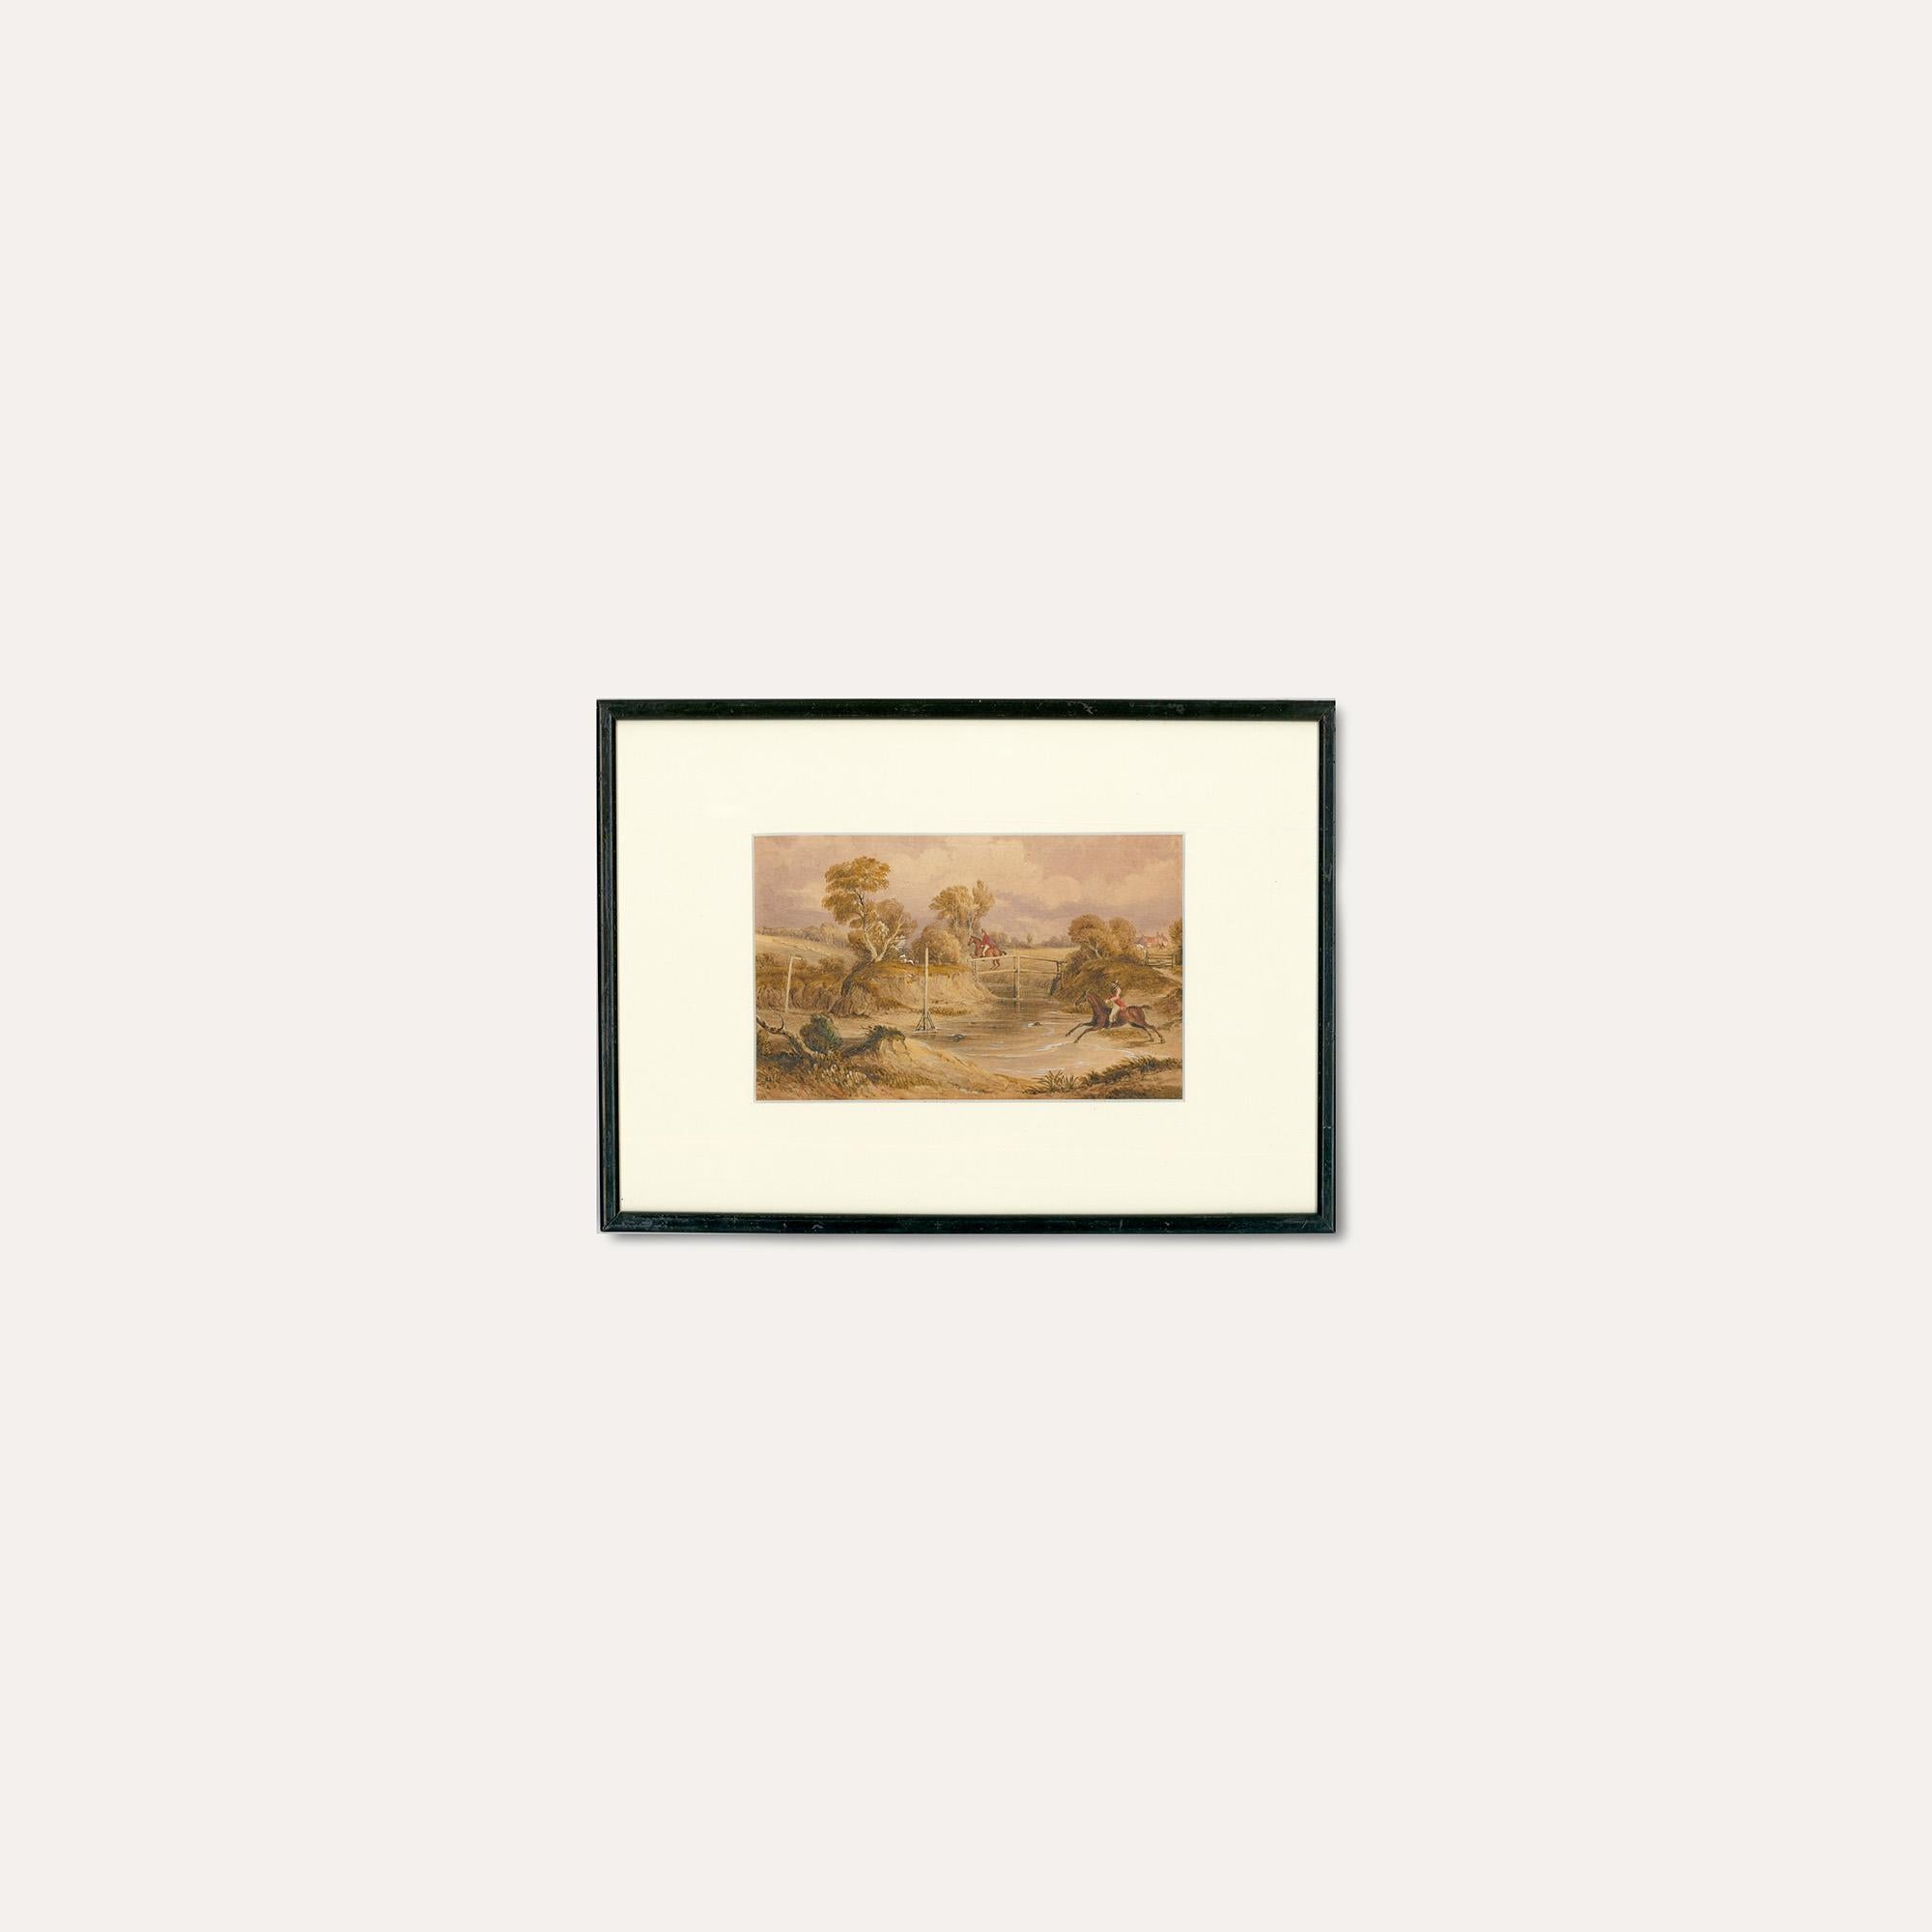 A fine watercolour study of huntsmen and hounds in a landscape. The horses jump and gallop through a shallow river following a large pack of dogs in a distant field. The artist the intricate details of the landscape and figures with an expert hand